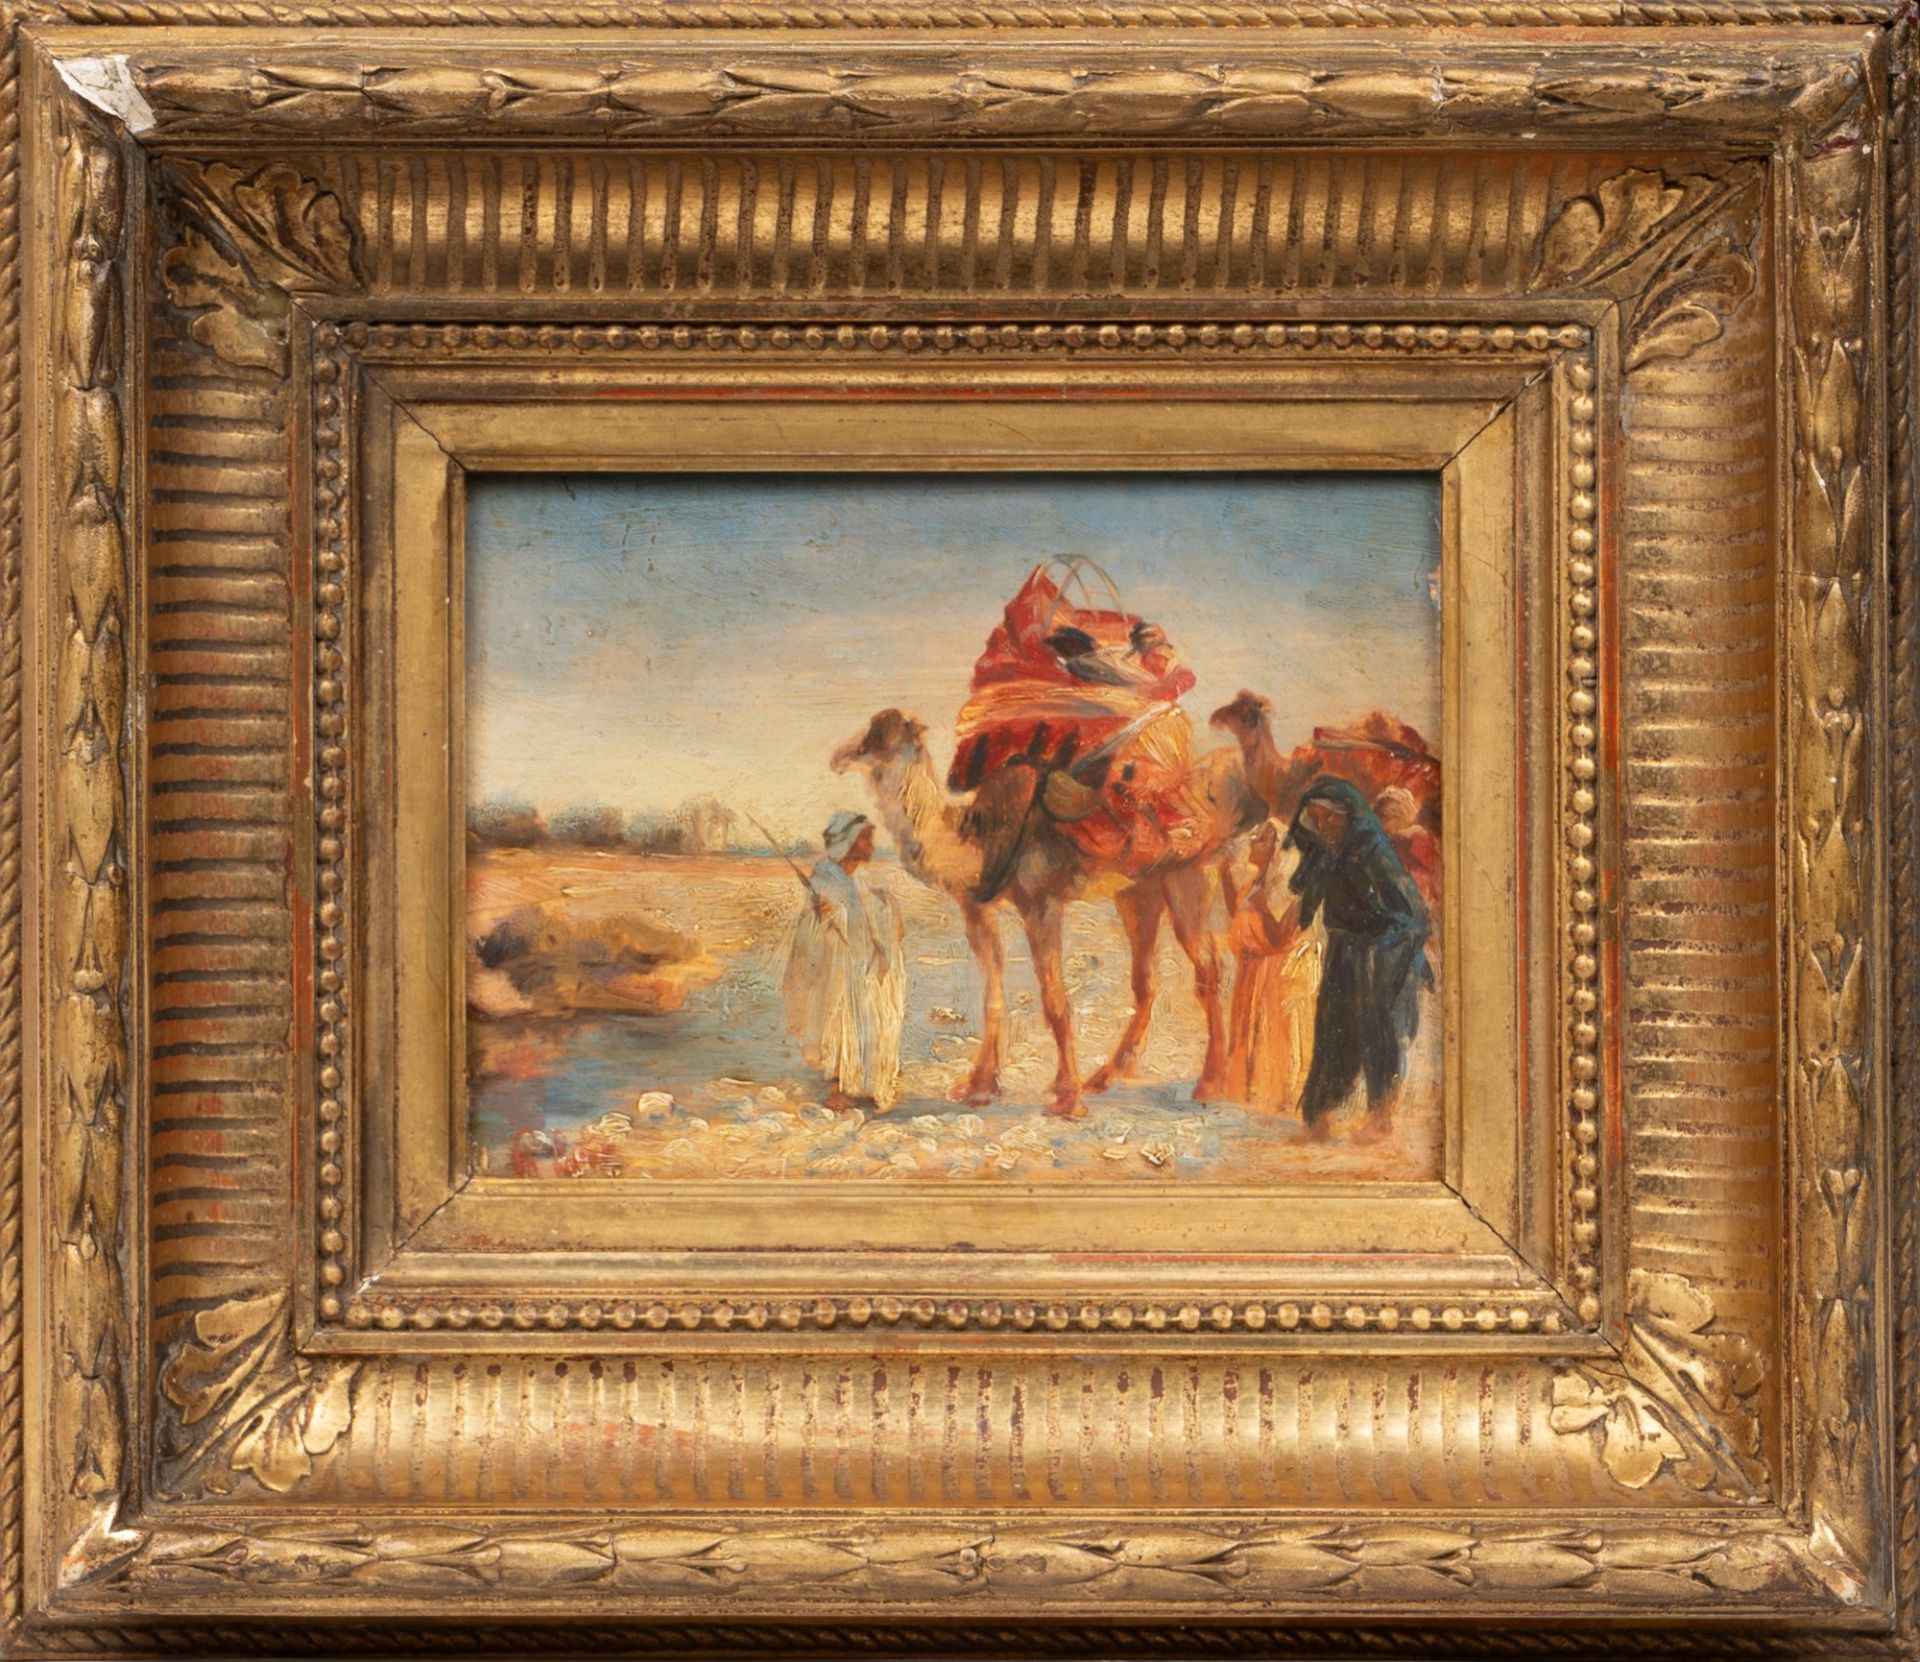 European school end of XIX century - Orientalist landscape with Bedouins and camels - Image 2 of 3